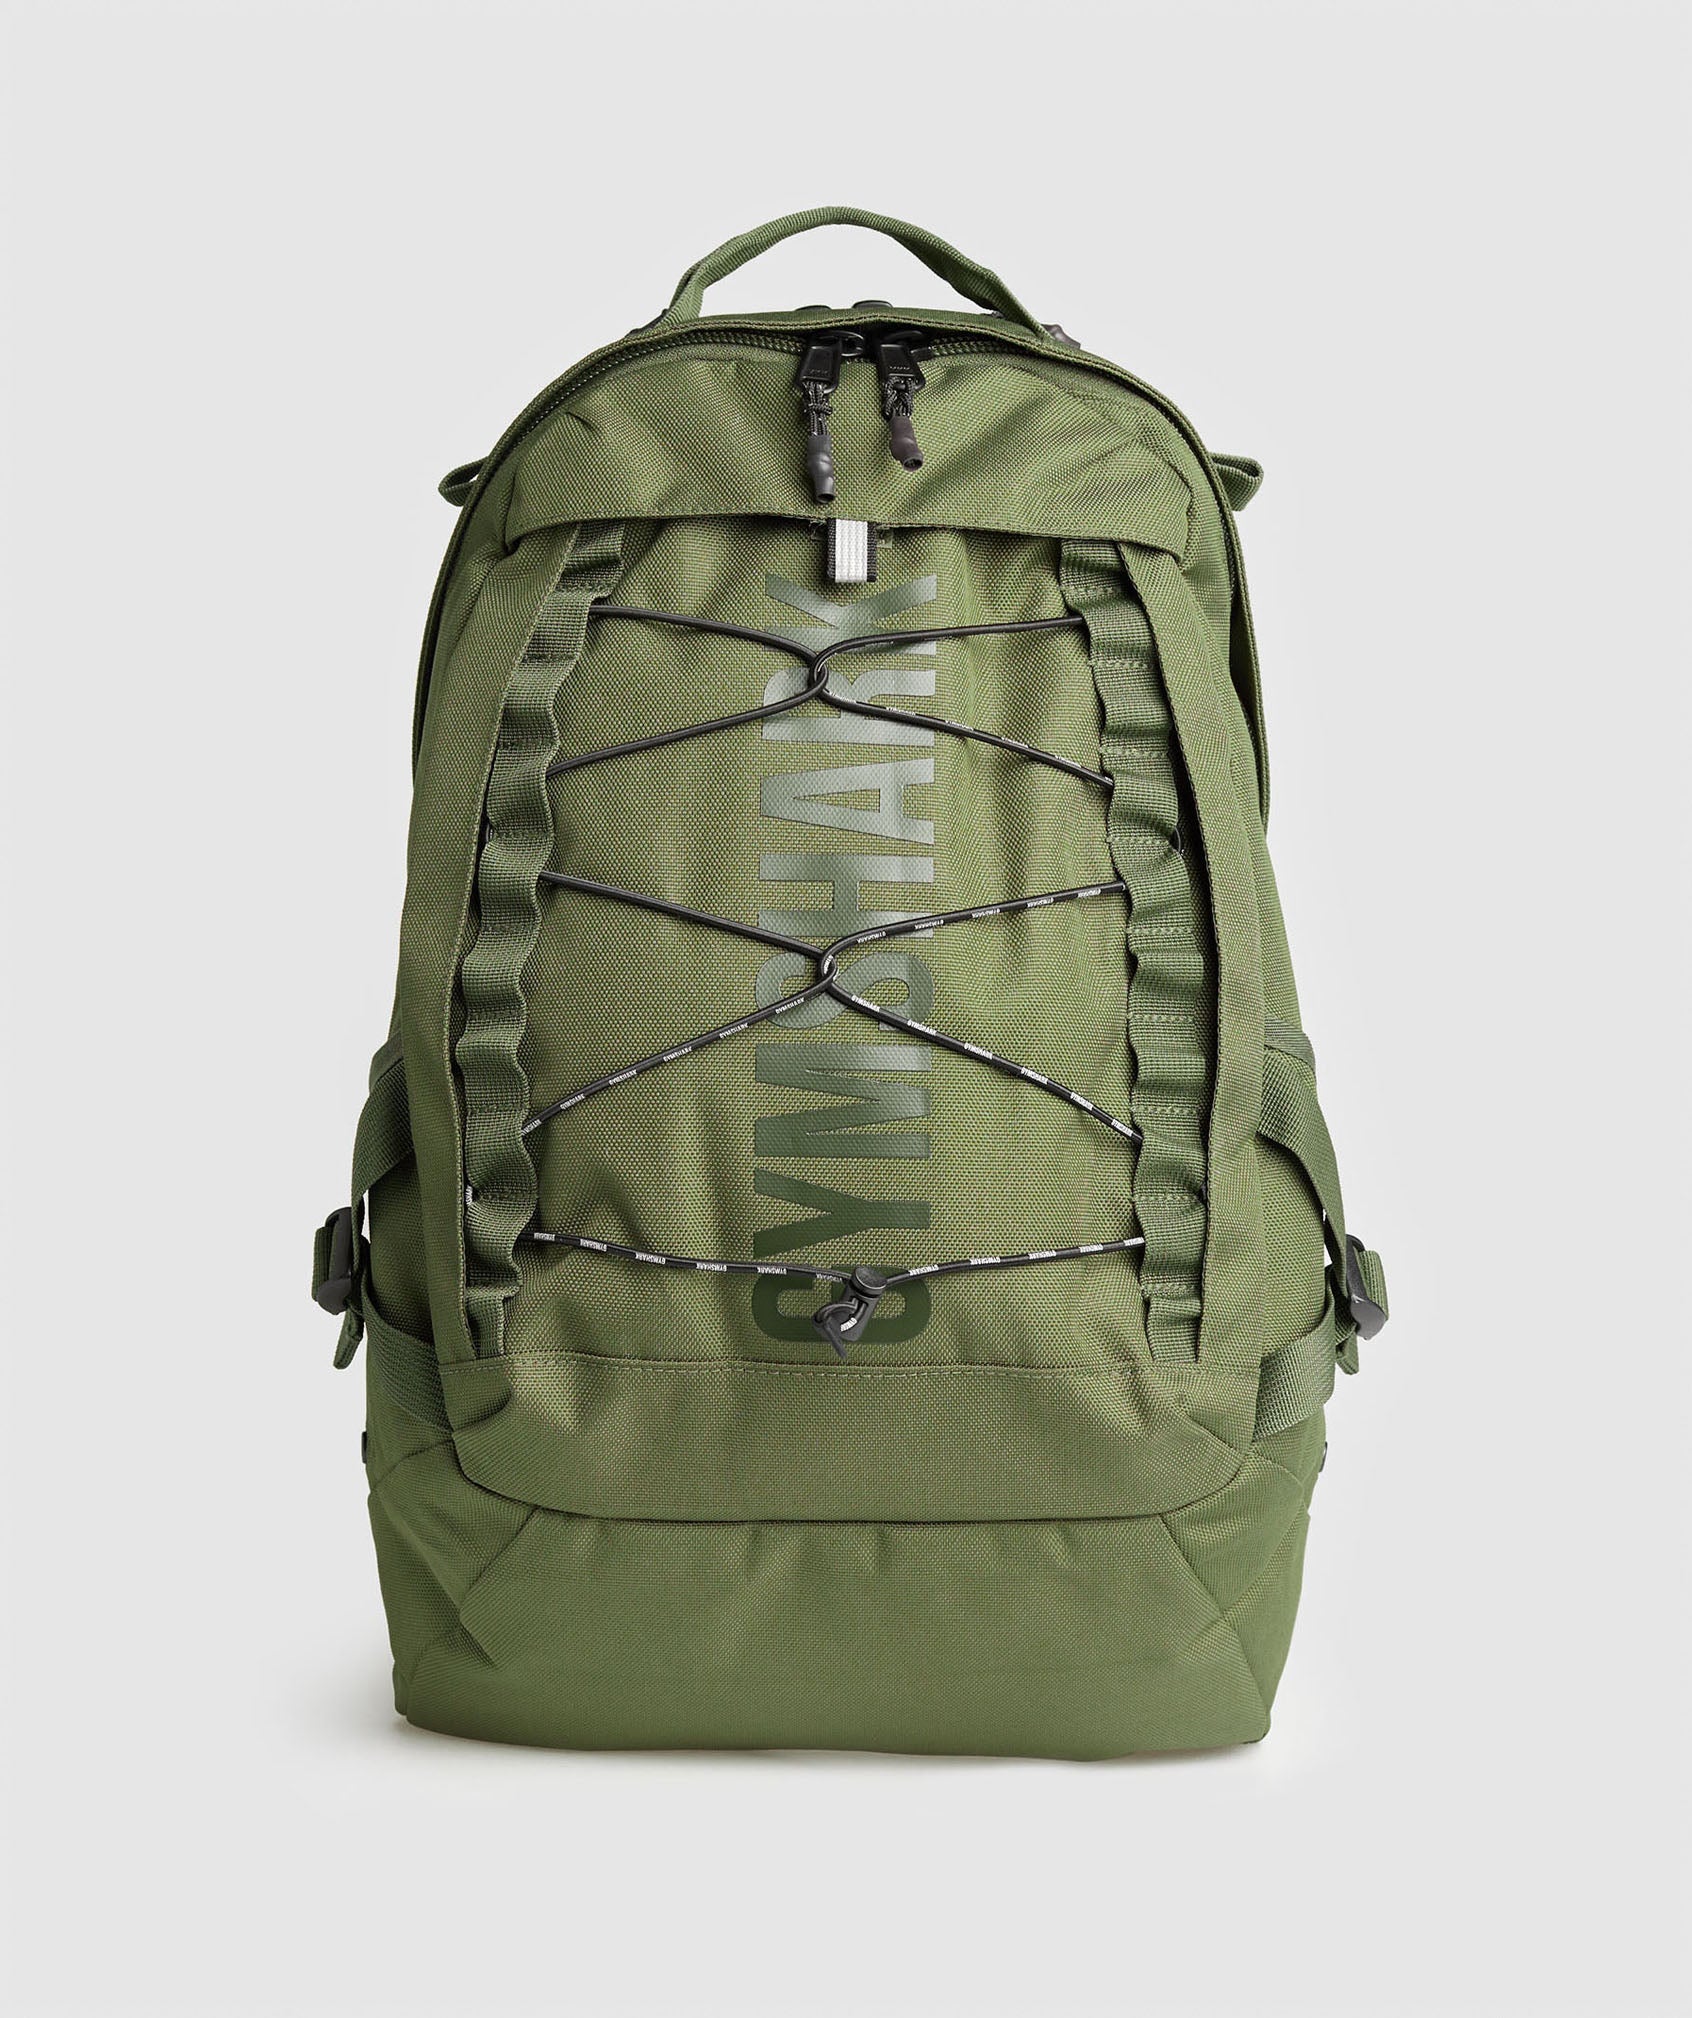 Pursuit Backpack in Green